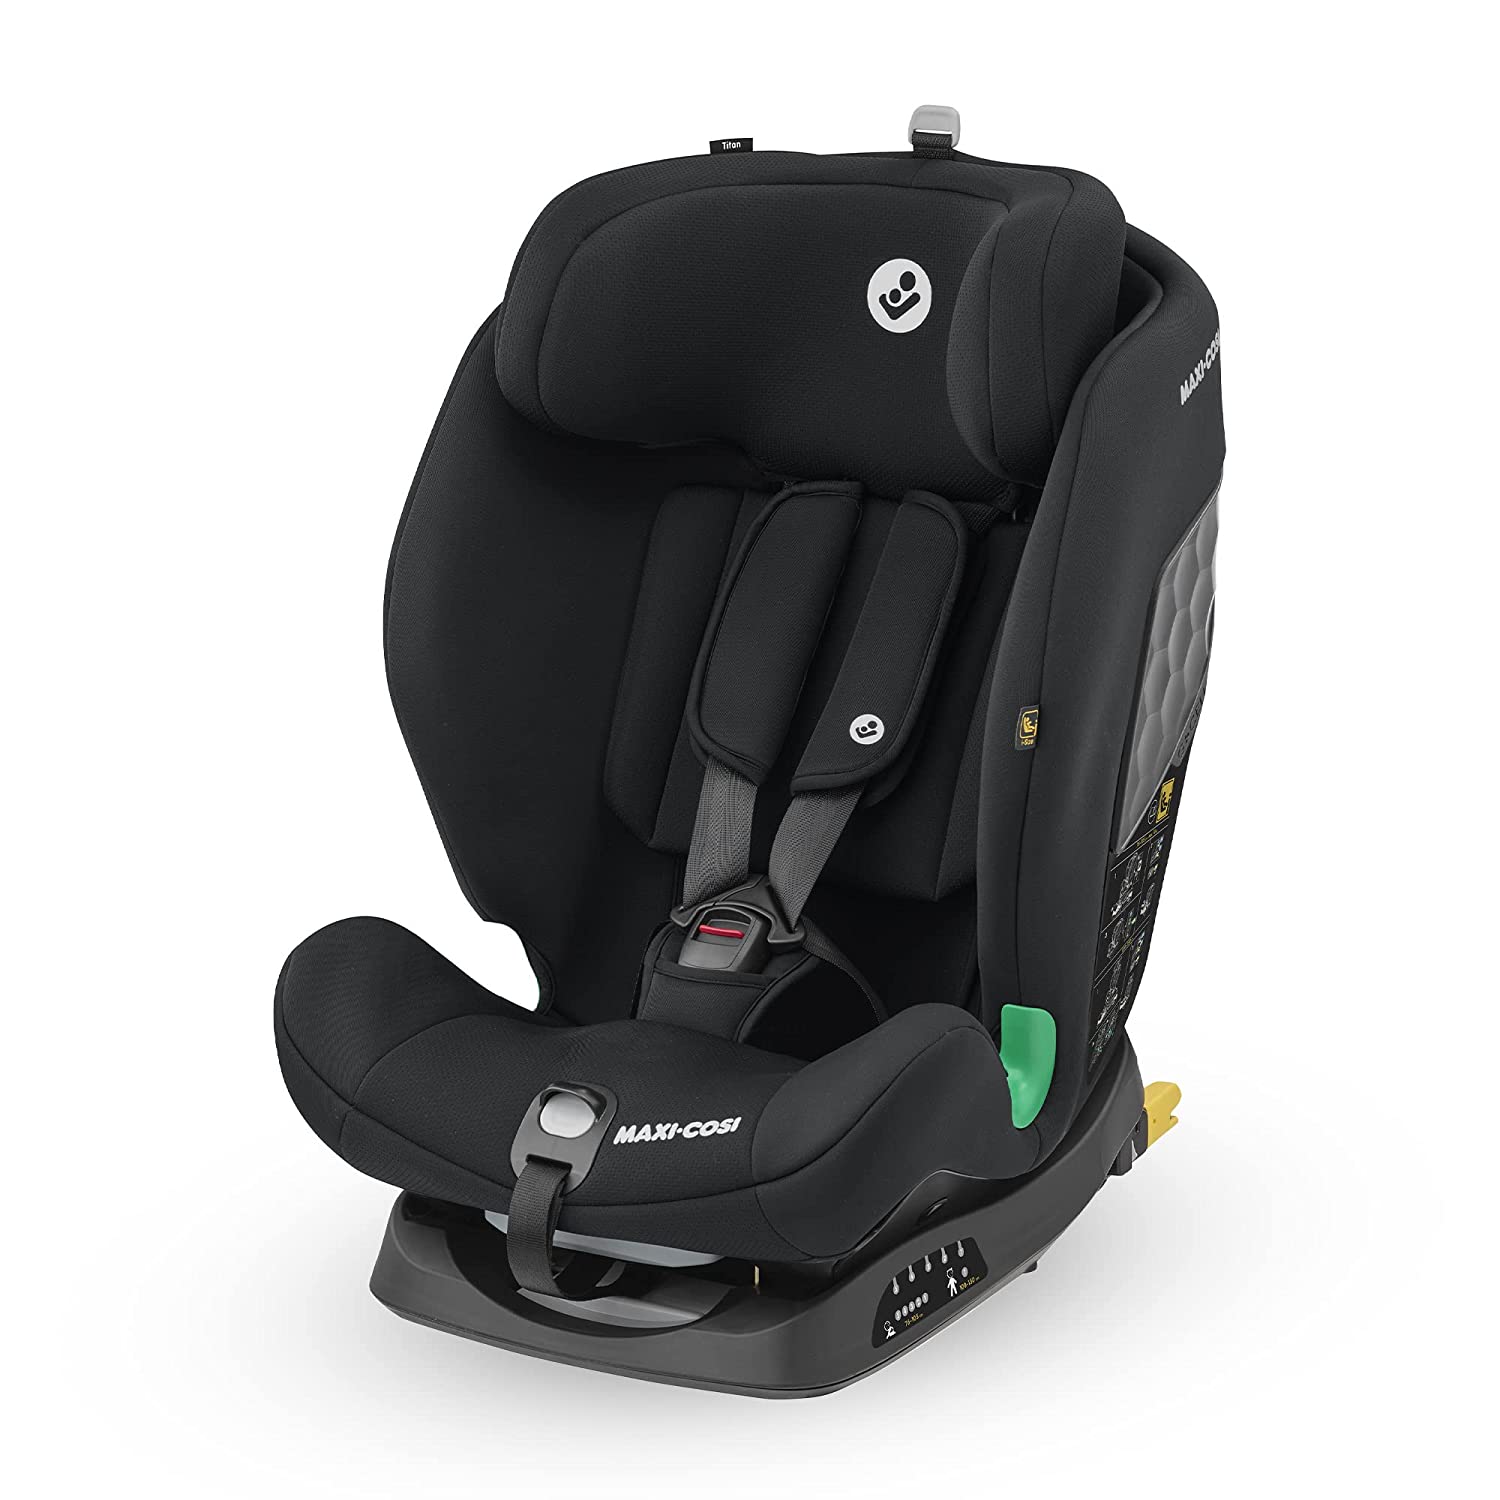 Maxi-Cosi Titan i-Size i-Size Child Seat with ISOFIX and Resting Position Group 1/2/3 Car Seat (9-36 kg), Usable from Approx. 9 Months to Approx. 12 Years, Basic Black